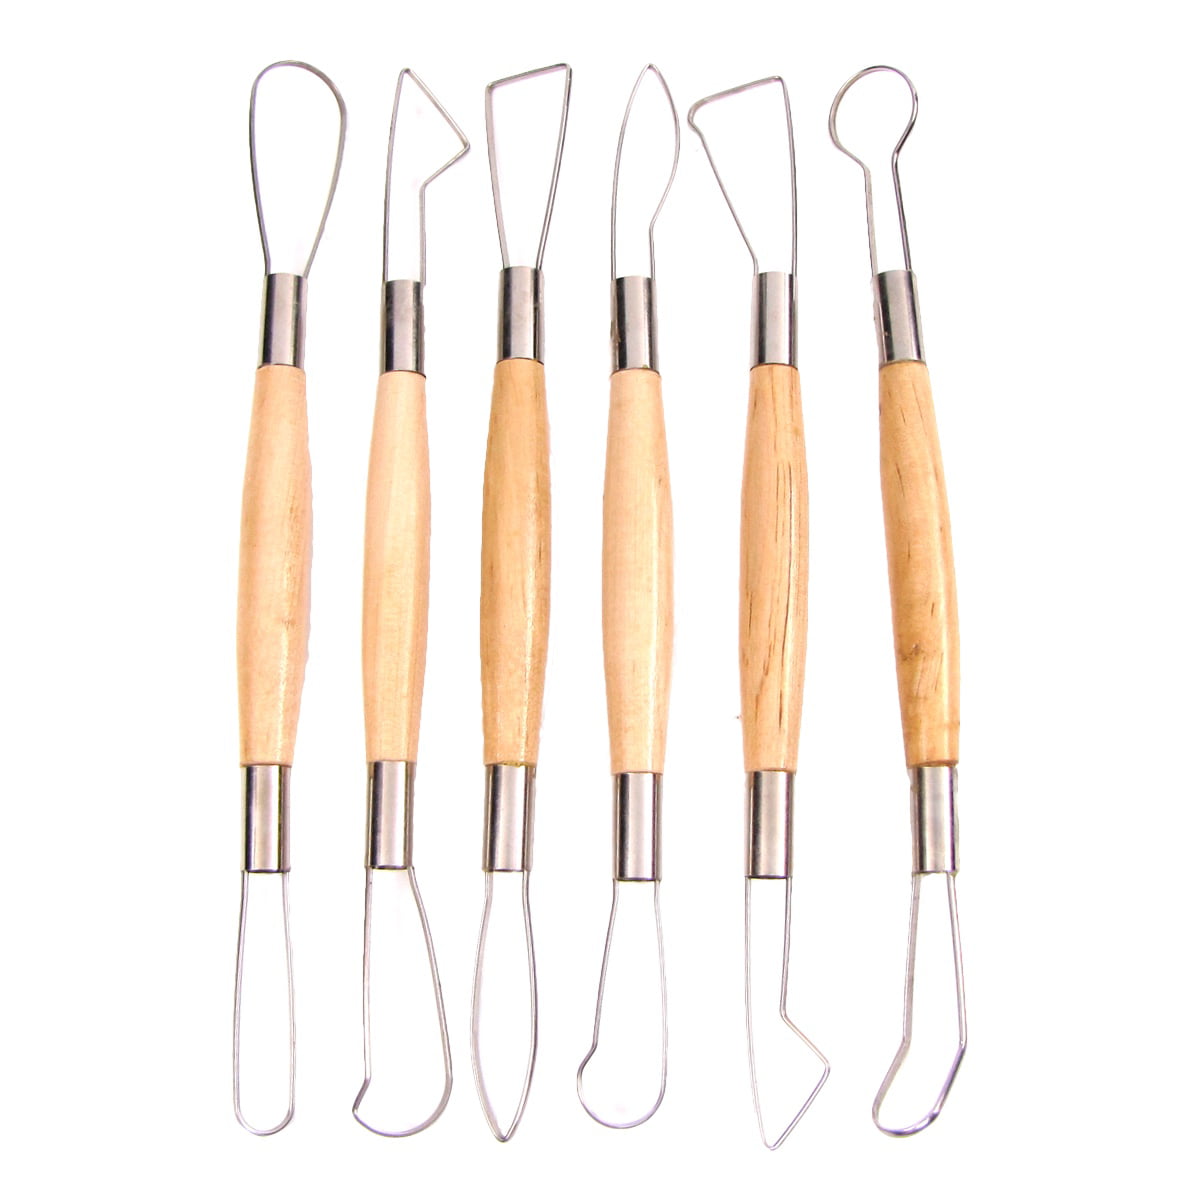 Clay Sculpting Wax Carving Pottery Tools Polymer Ceramic Modeling Repair 6PCS 